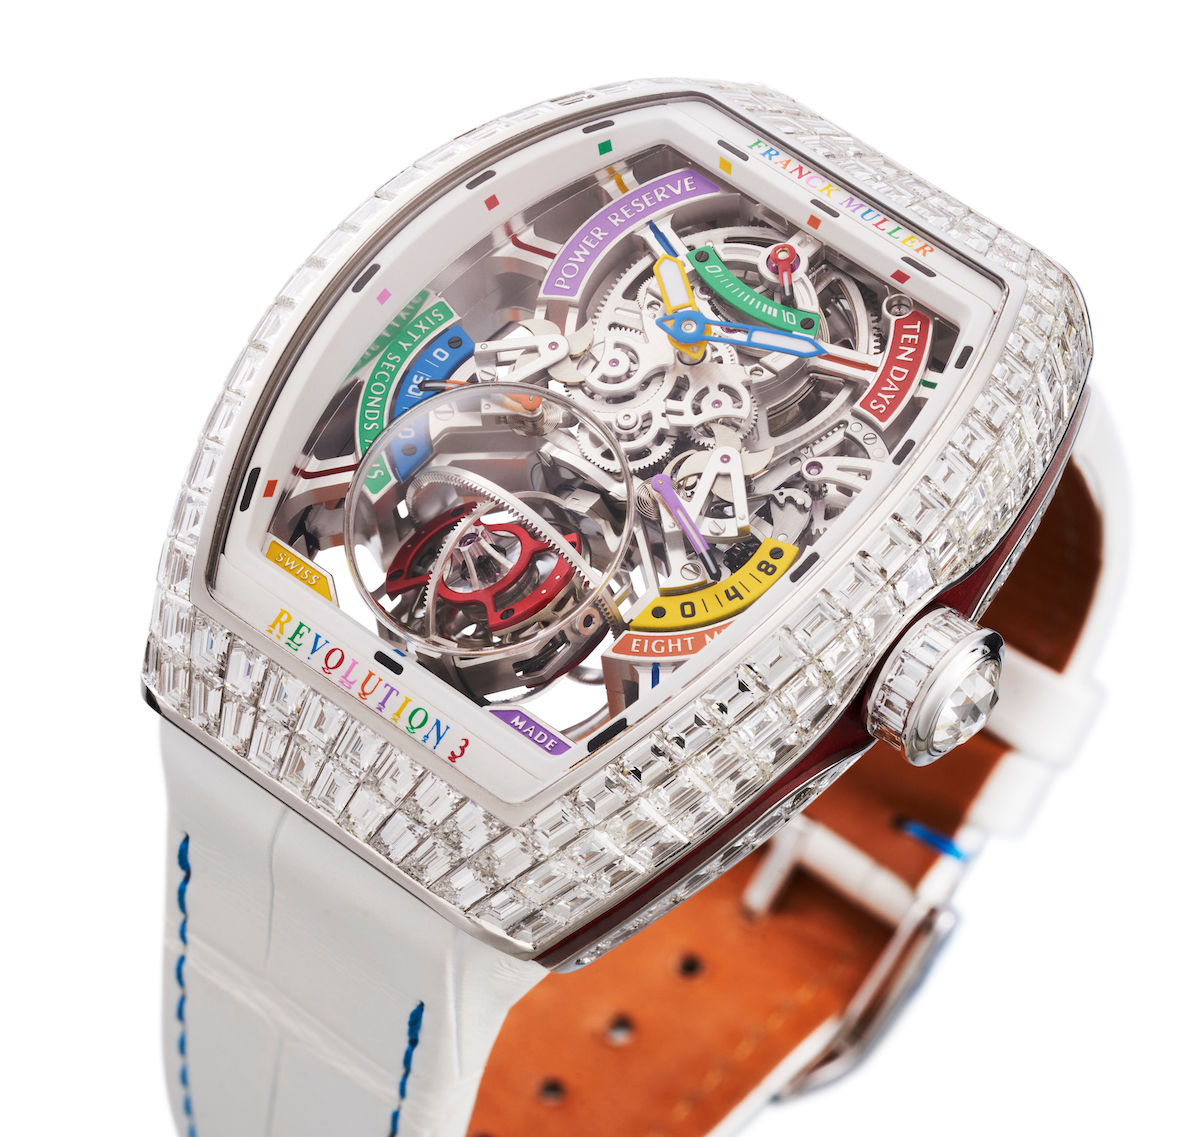 franck-muller-and-cortina-watch-collaborate-on-five-high-jewellery-watches-with-high-complications